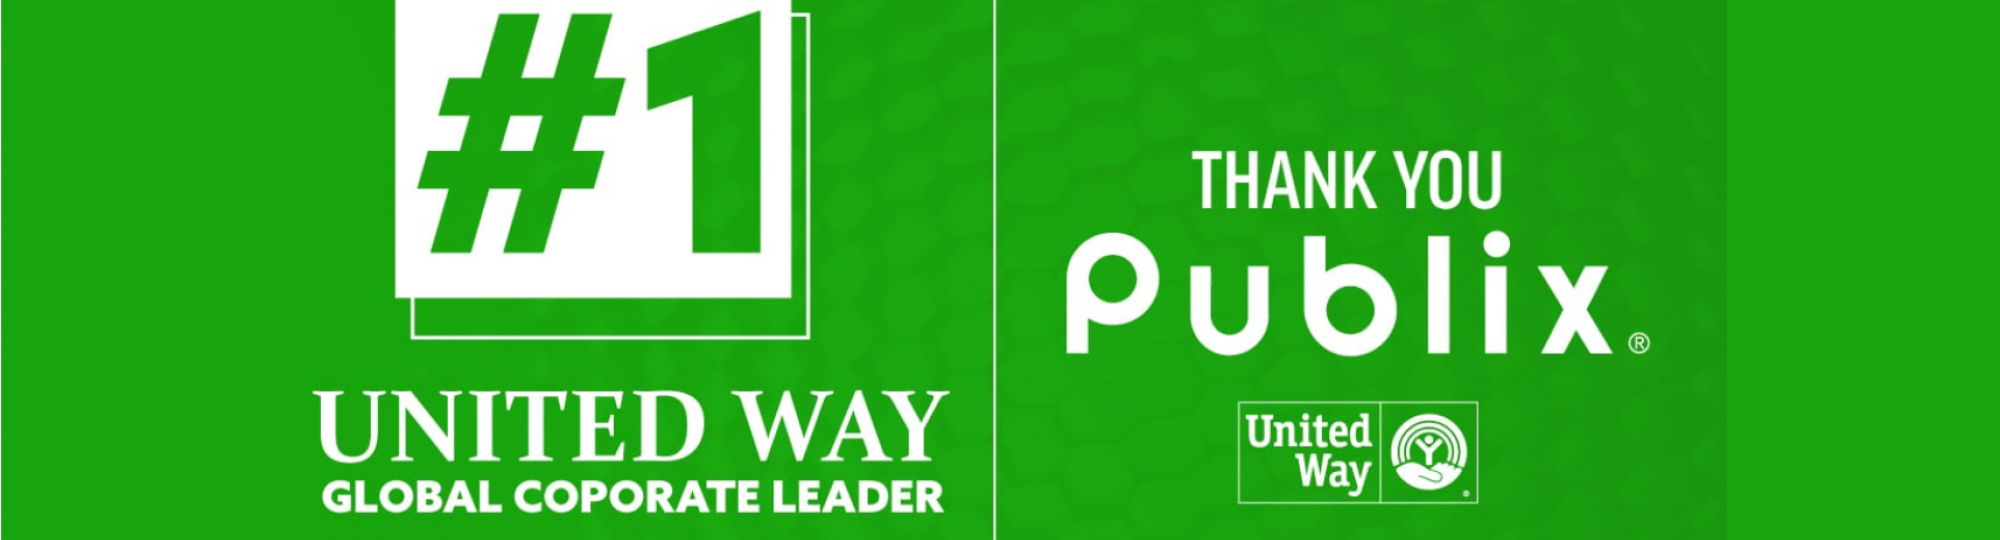 Publix #1 United Way Global Corporate Leader